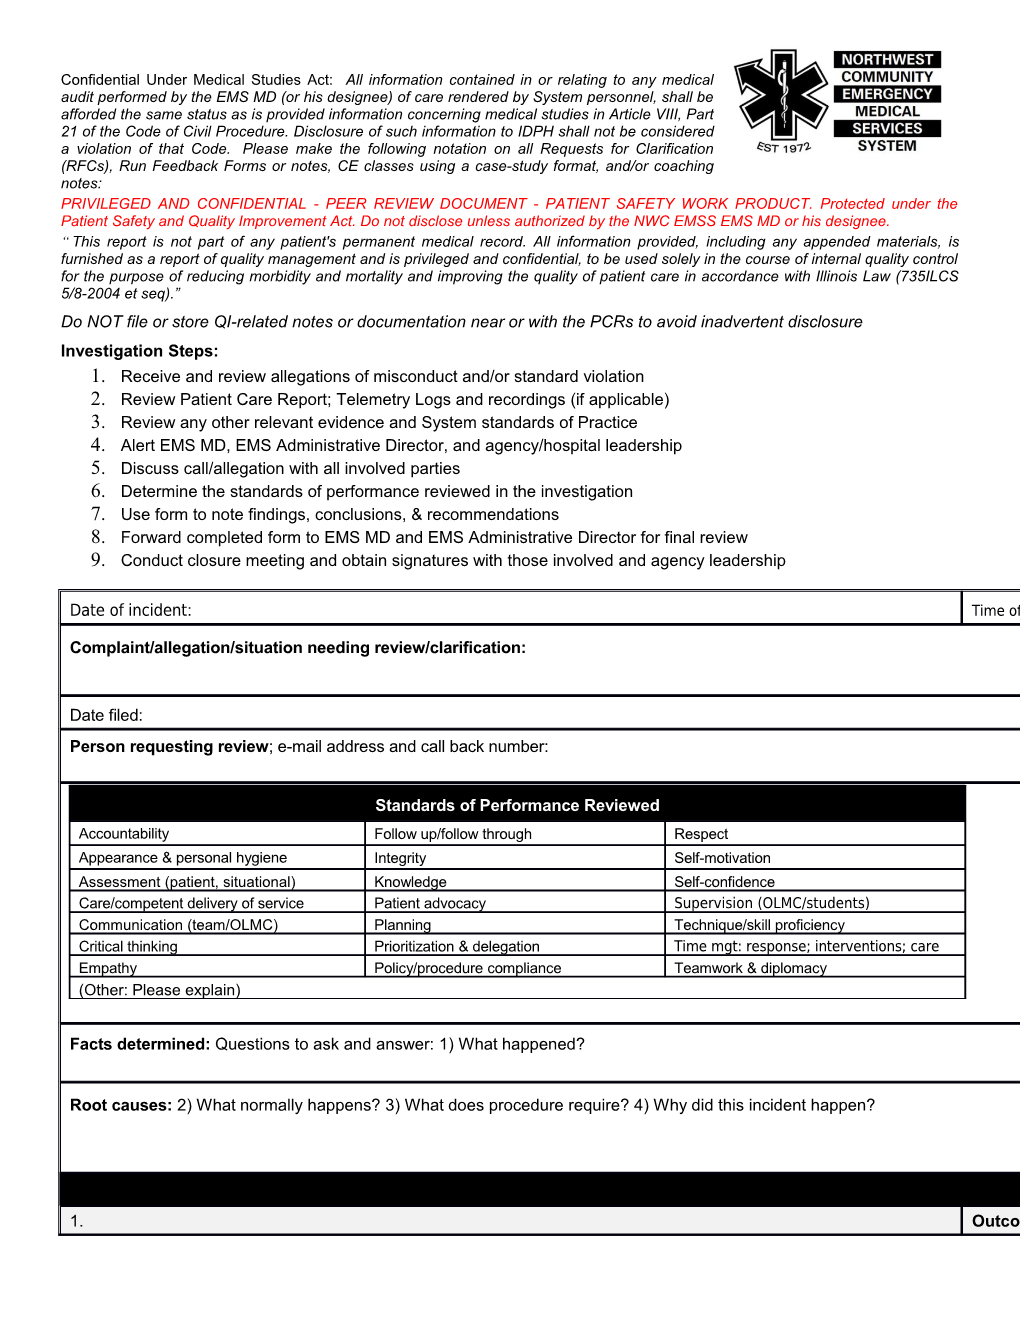 NWC EMSS Quality Review Report Page